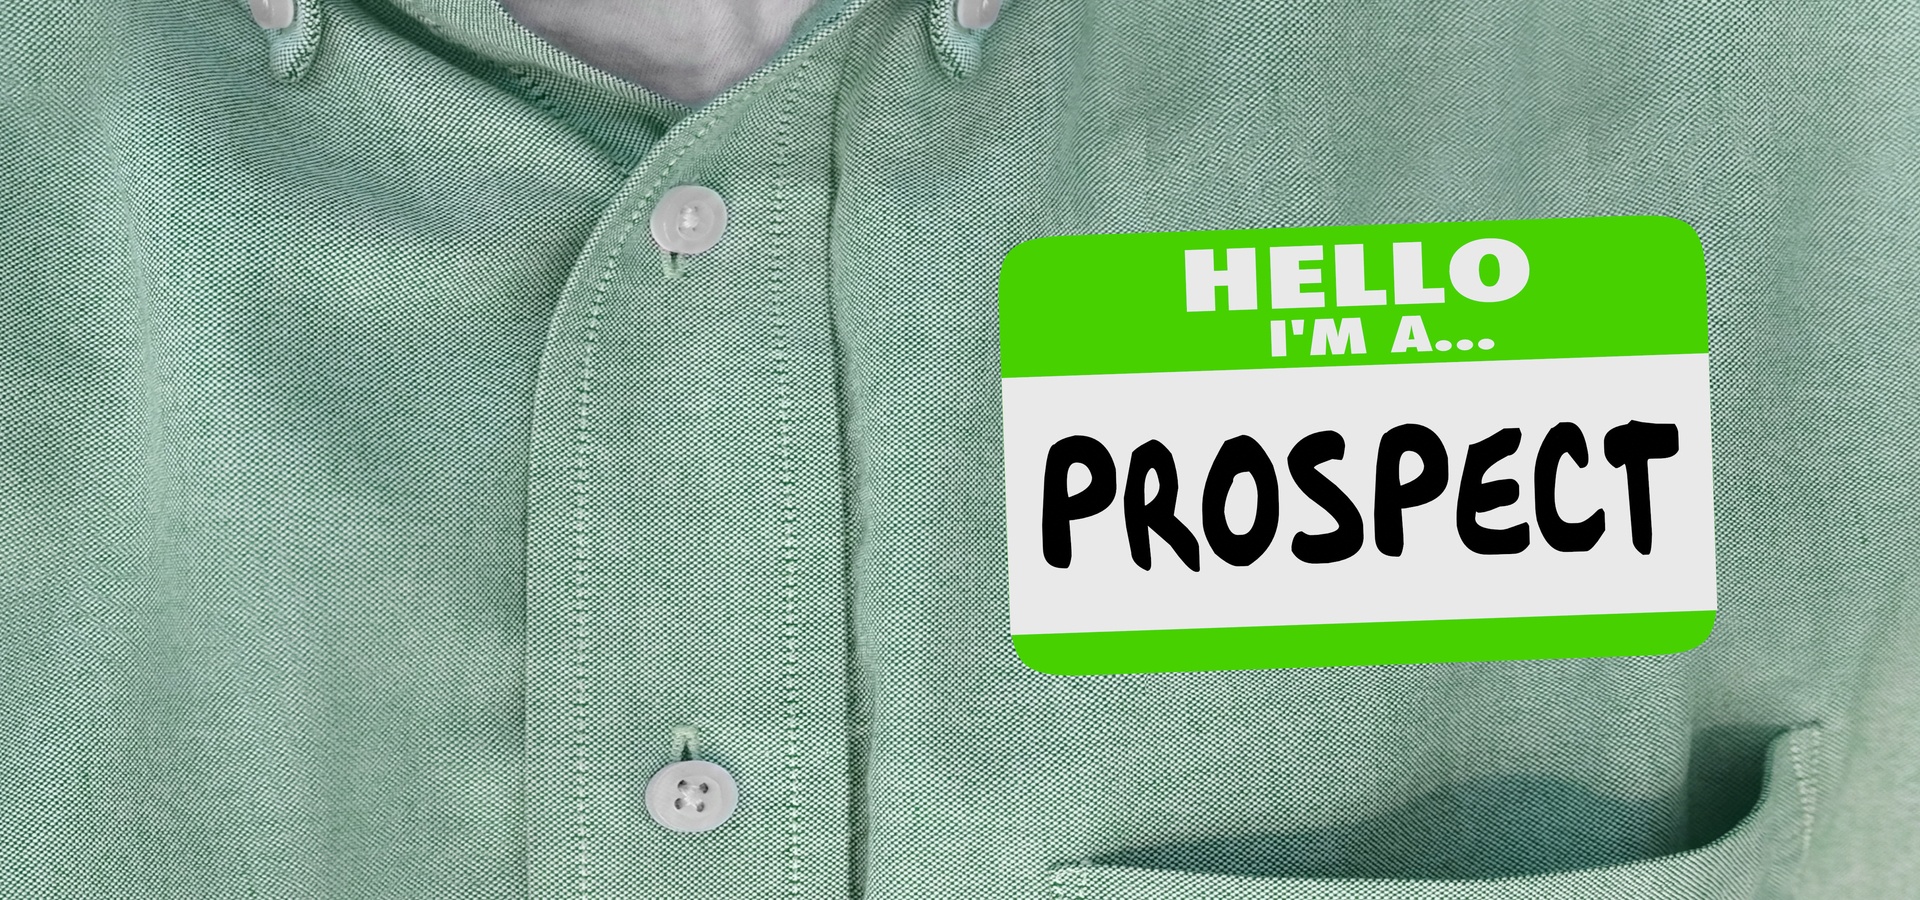 A sticker nametag on a shirt that says "Hello, I'm a Prospect"